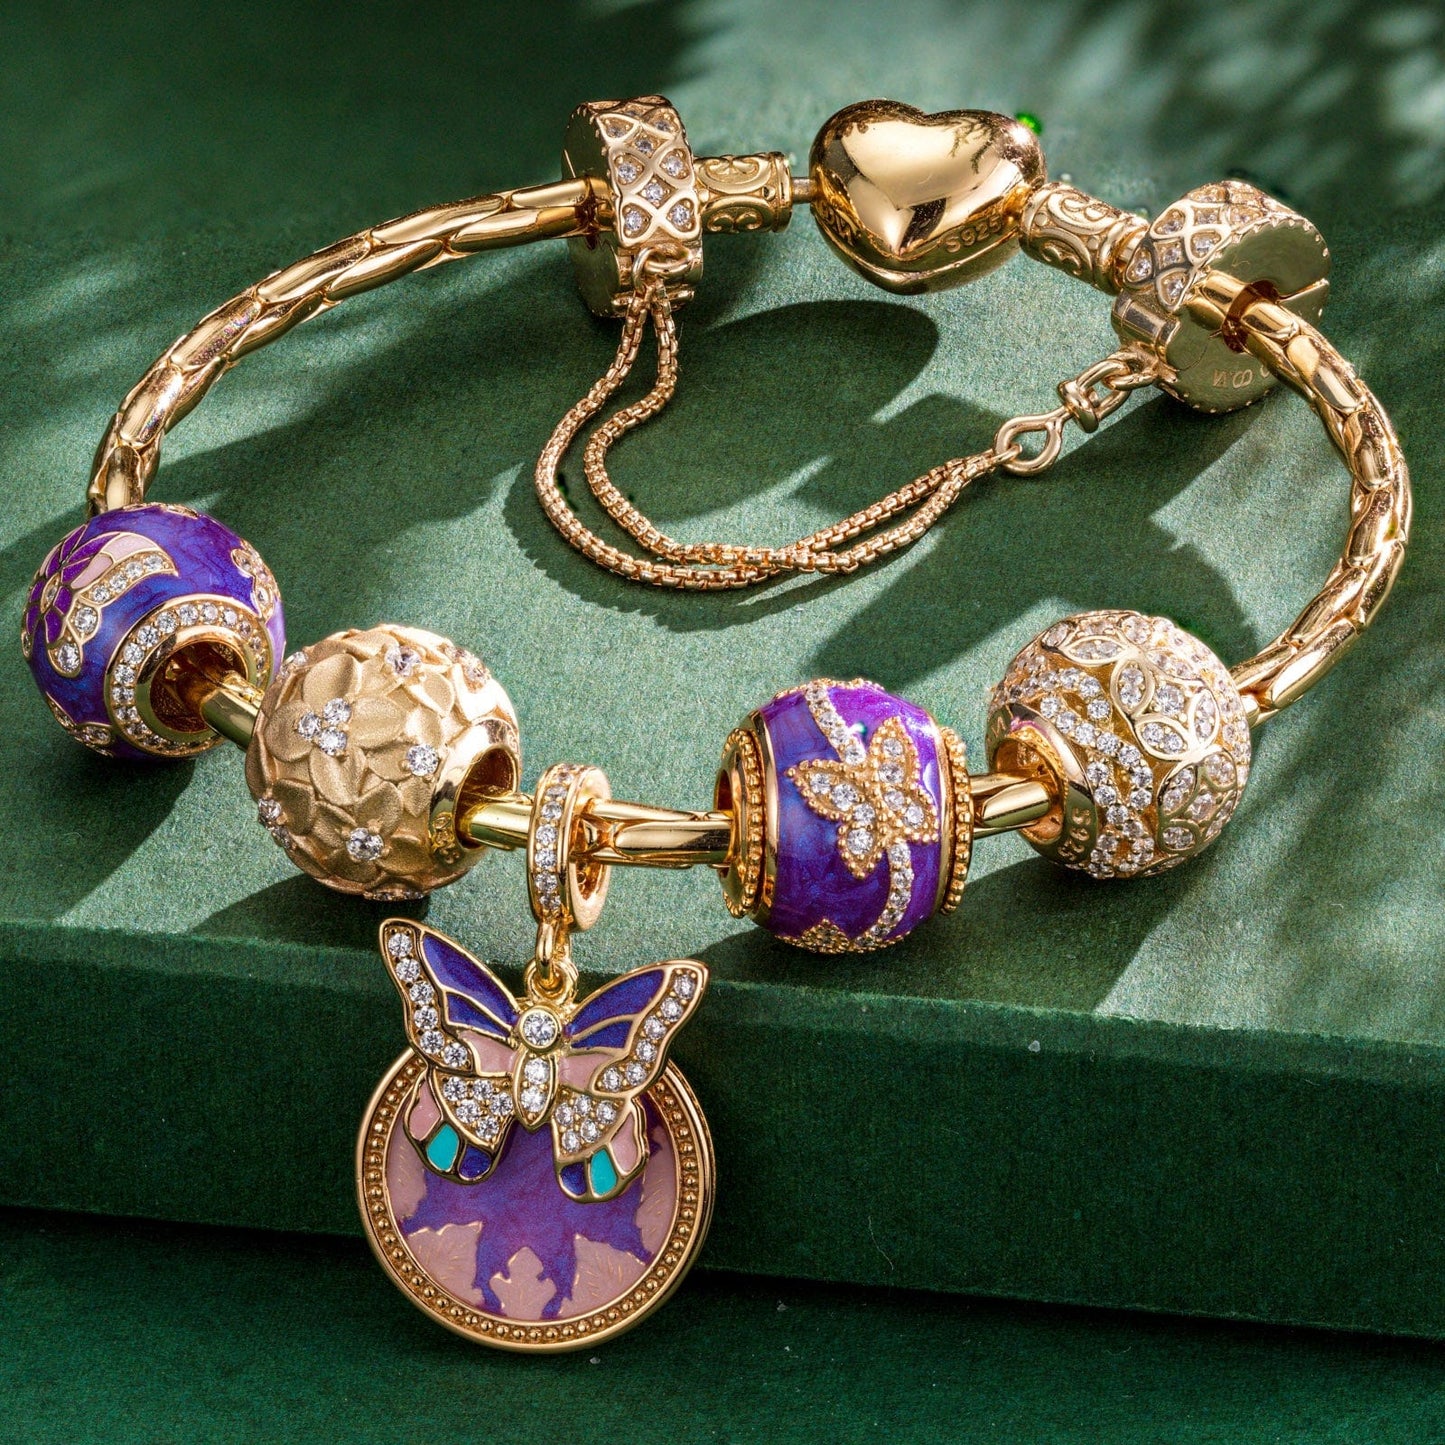 Sterling Silver Whispering Flower Dreams Charms Bracelet Set With Enamel In 14K Gold Plated